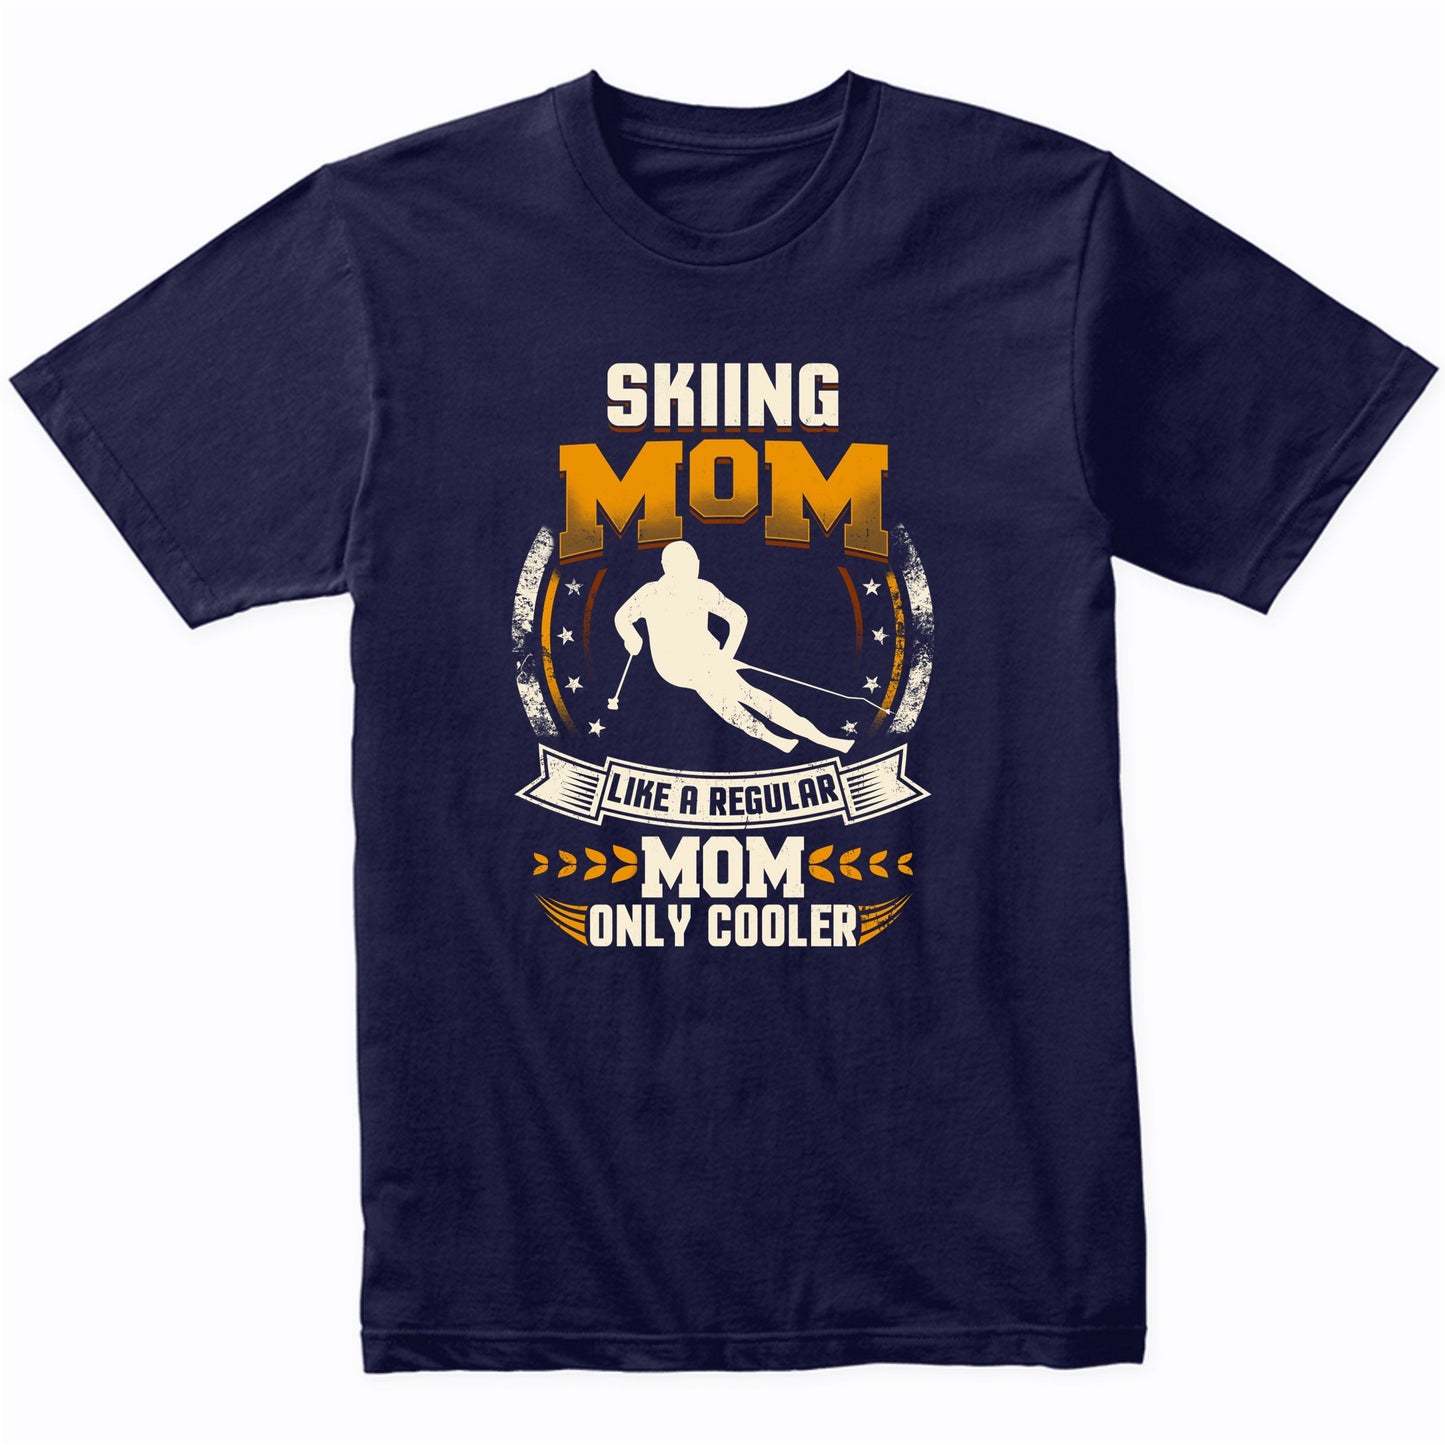 Skiing Mom Like A Regular Mom Only Cooler Funny T-Shirt